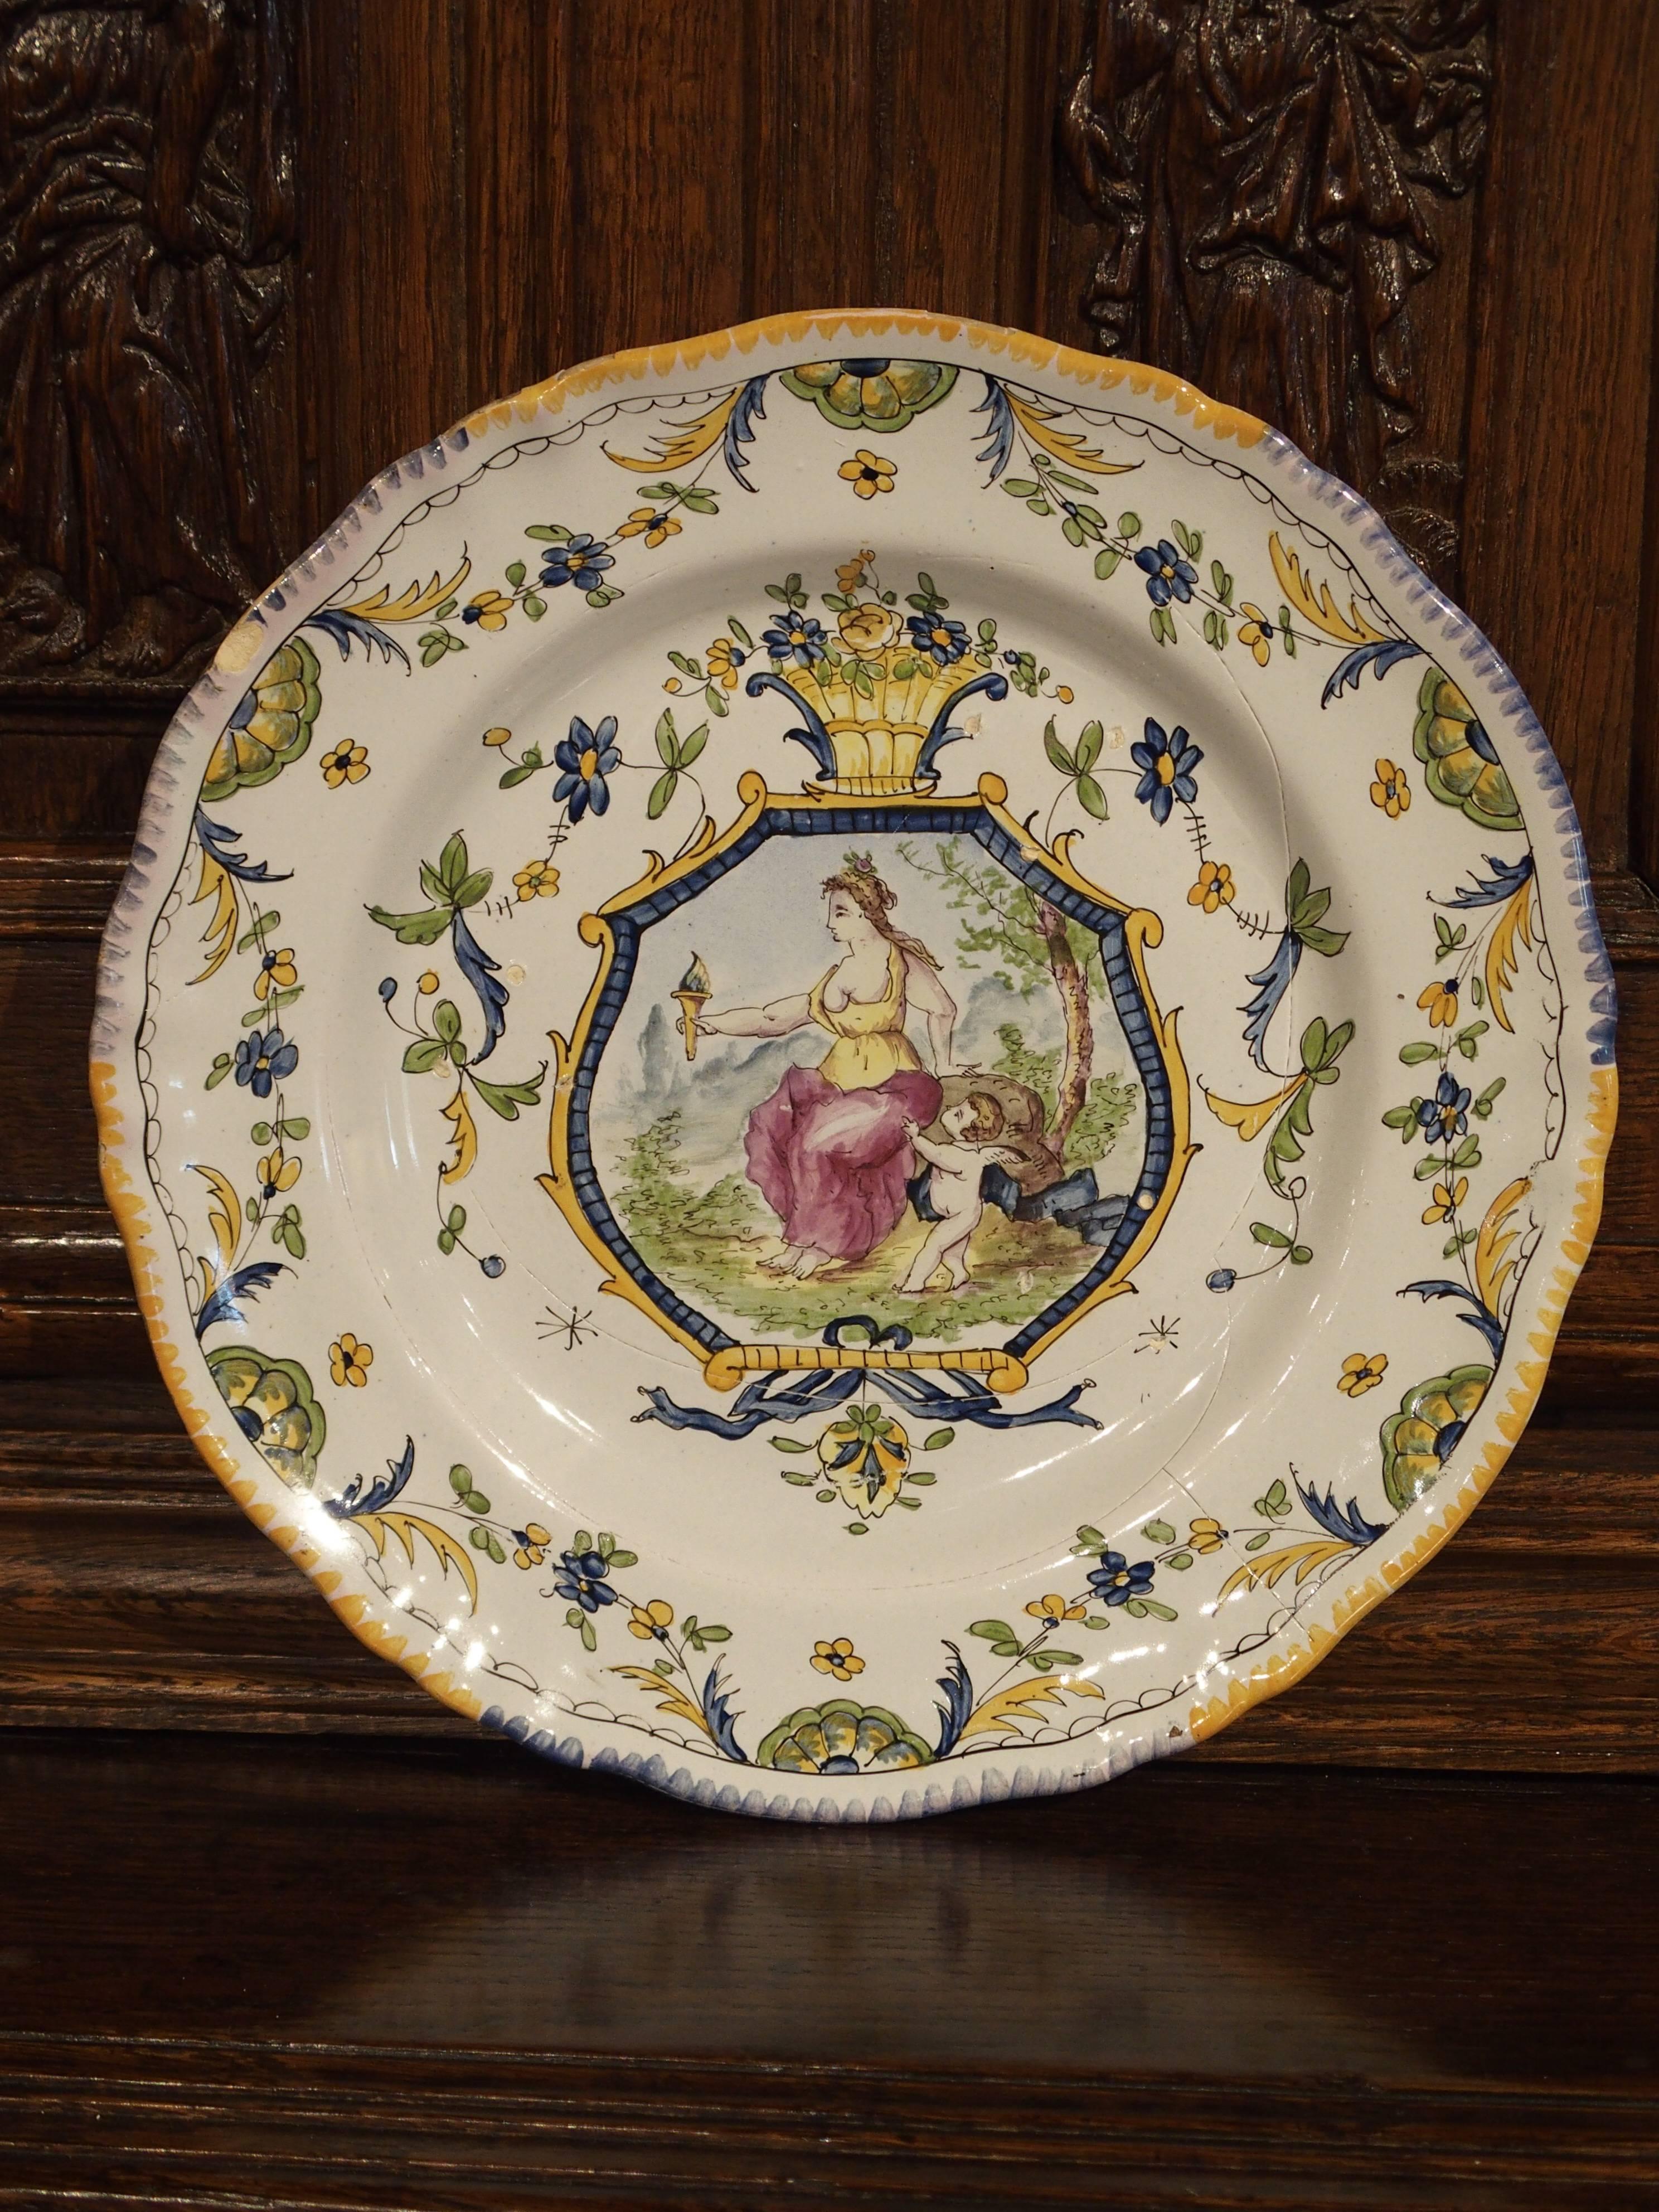 20th Century Hand-Painted French Faience 18th Century Reproduction Plate, Mid-1900s